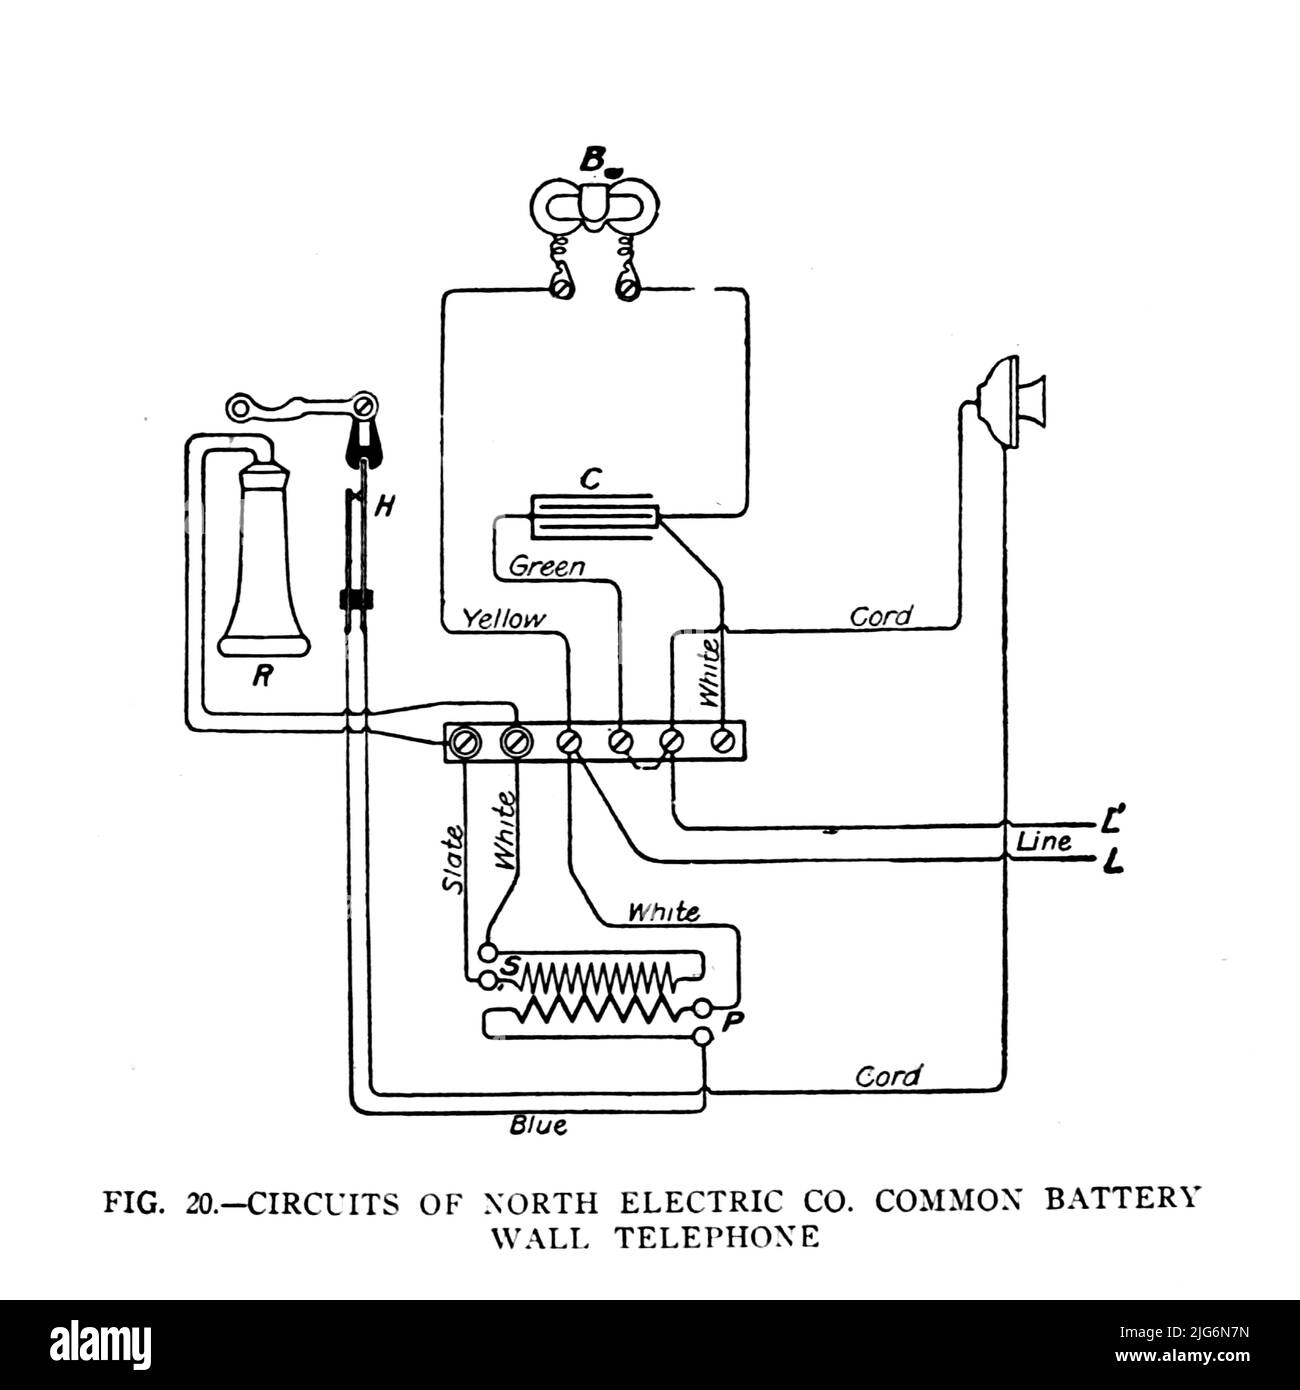 CIRCUITS OF NORTH ELECTRIC CO. COMMON BATTERY WALL TELEPHONE from the ' Military Signal Corps manual ' by James Andrew White, Publication date 1918 Publisher New York : Wireless Press, inc. Stock Photo